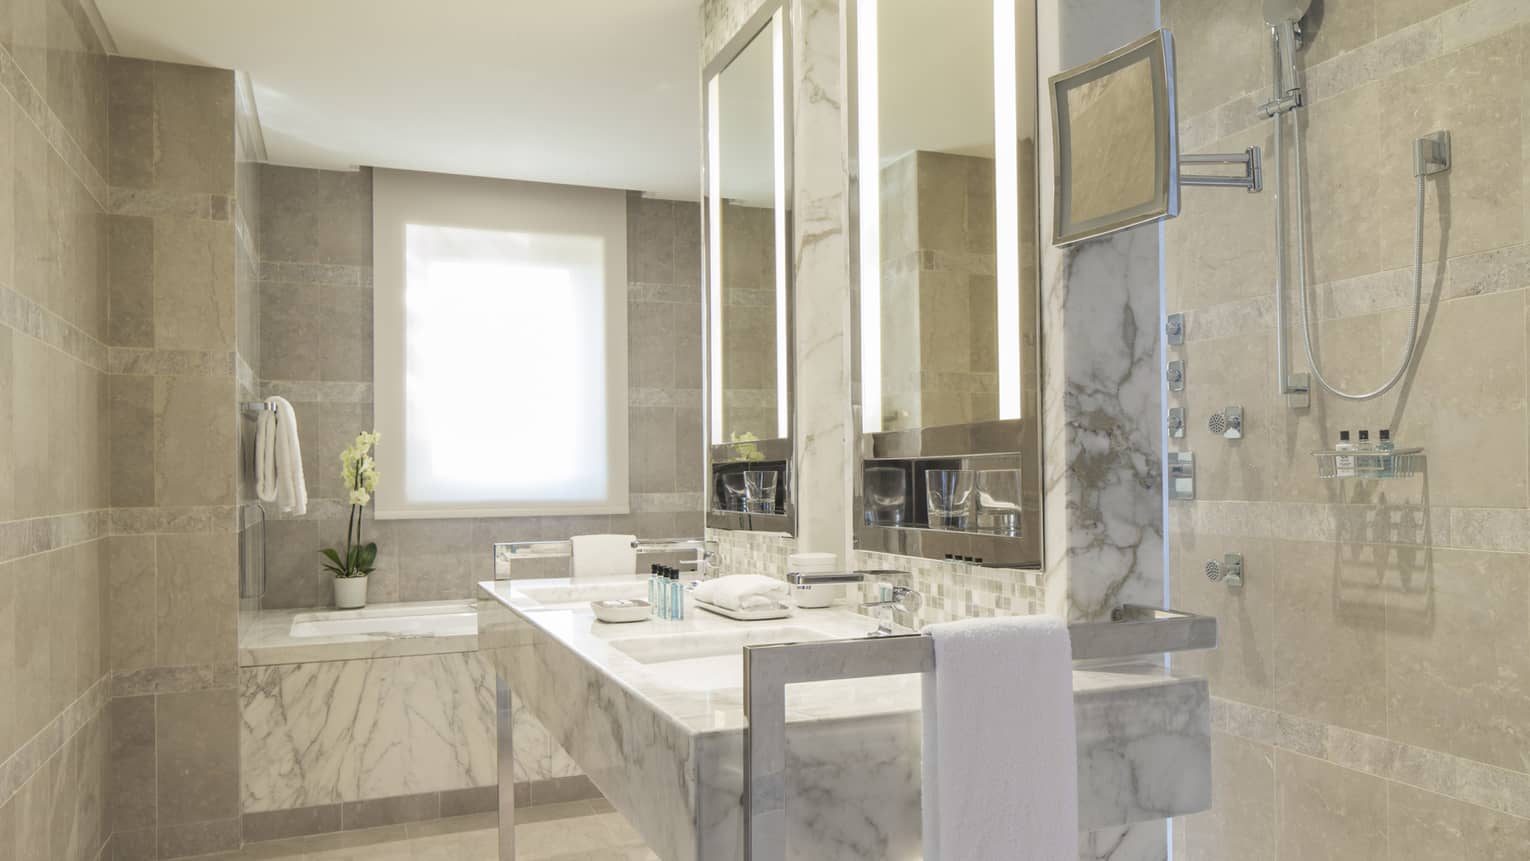 Executive Suite full white and grey marble bathroom, vanity with double sink, tub